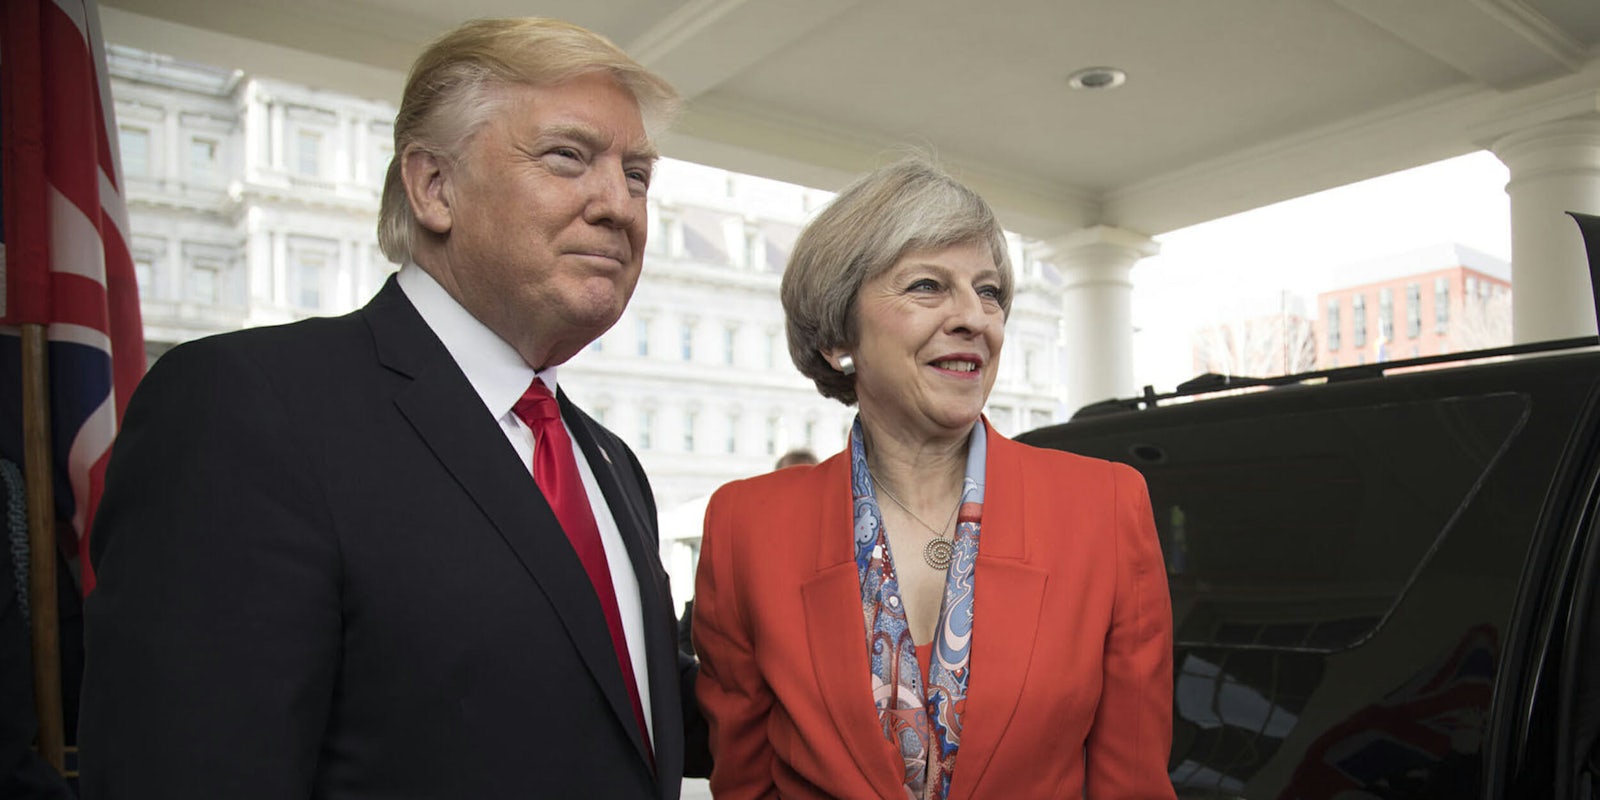 Donald Trump tagged the wrong Theresa May on Twitter while responding to her criticism of him retweeting anti-Muslim propaganda from a far-right group.